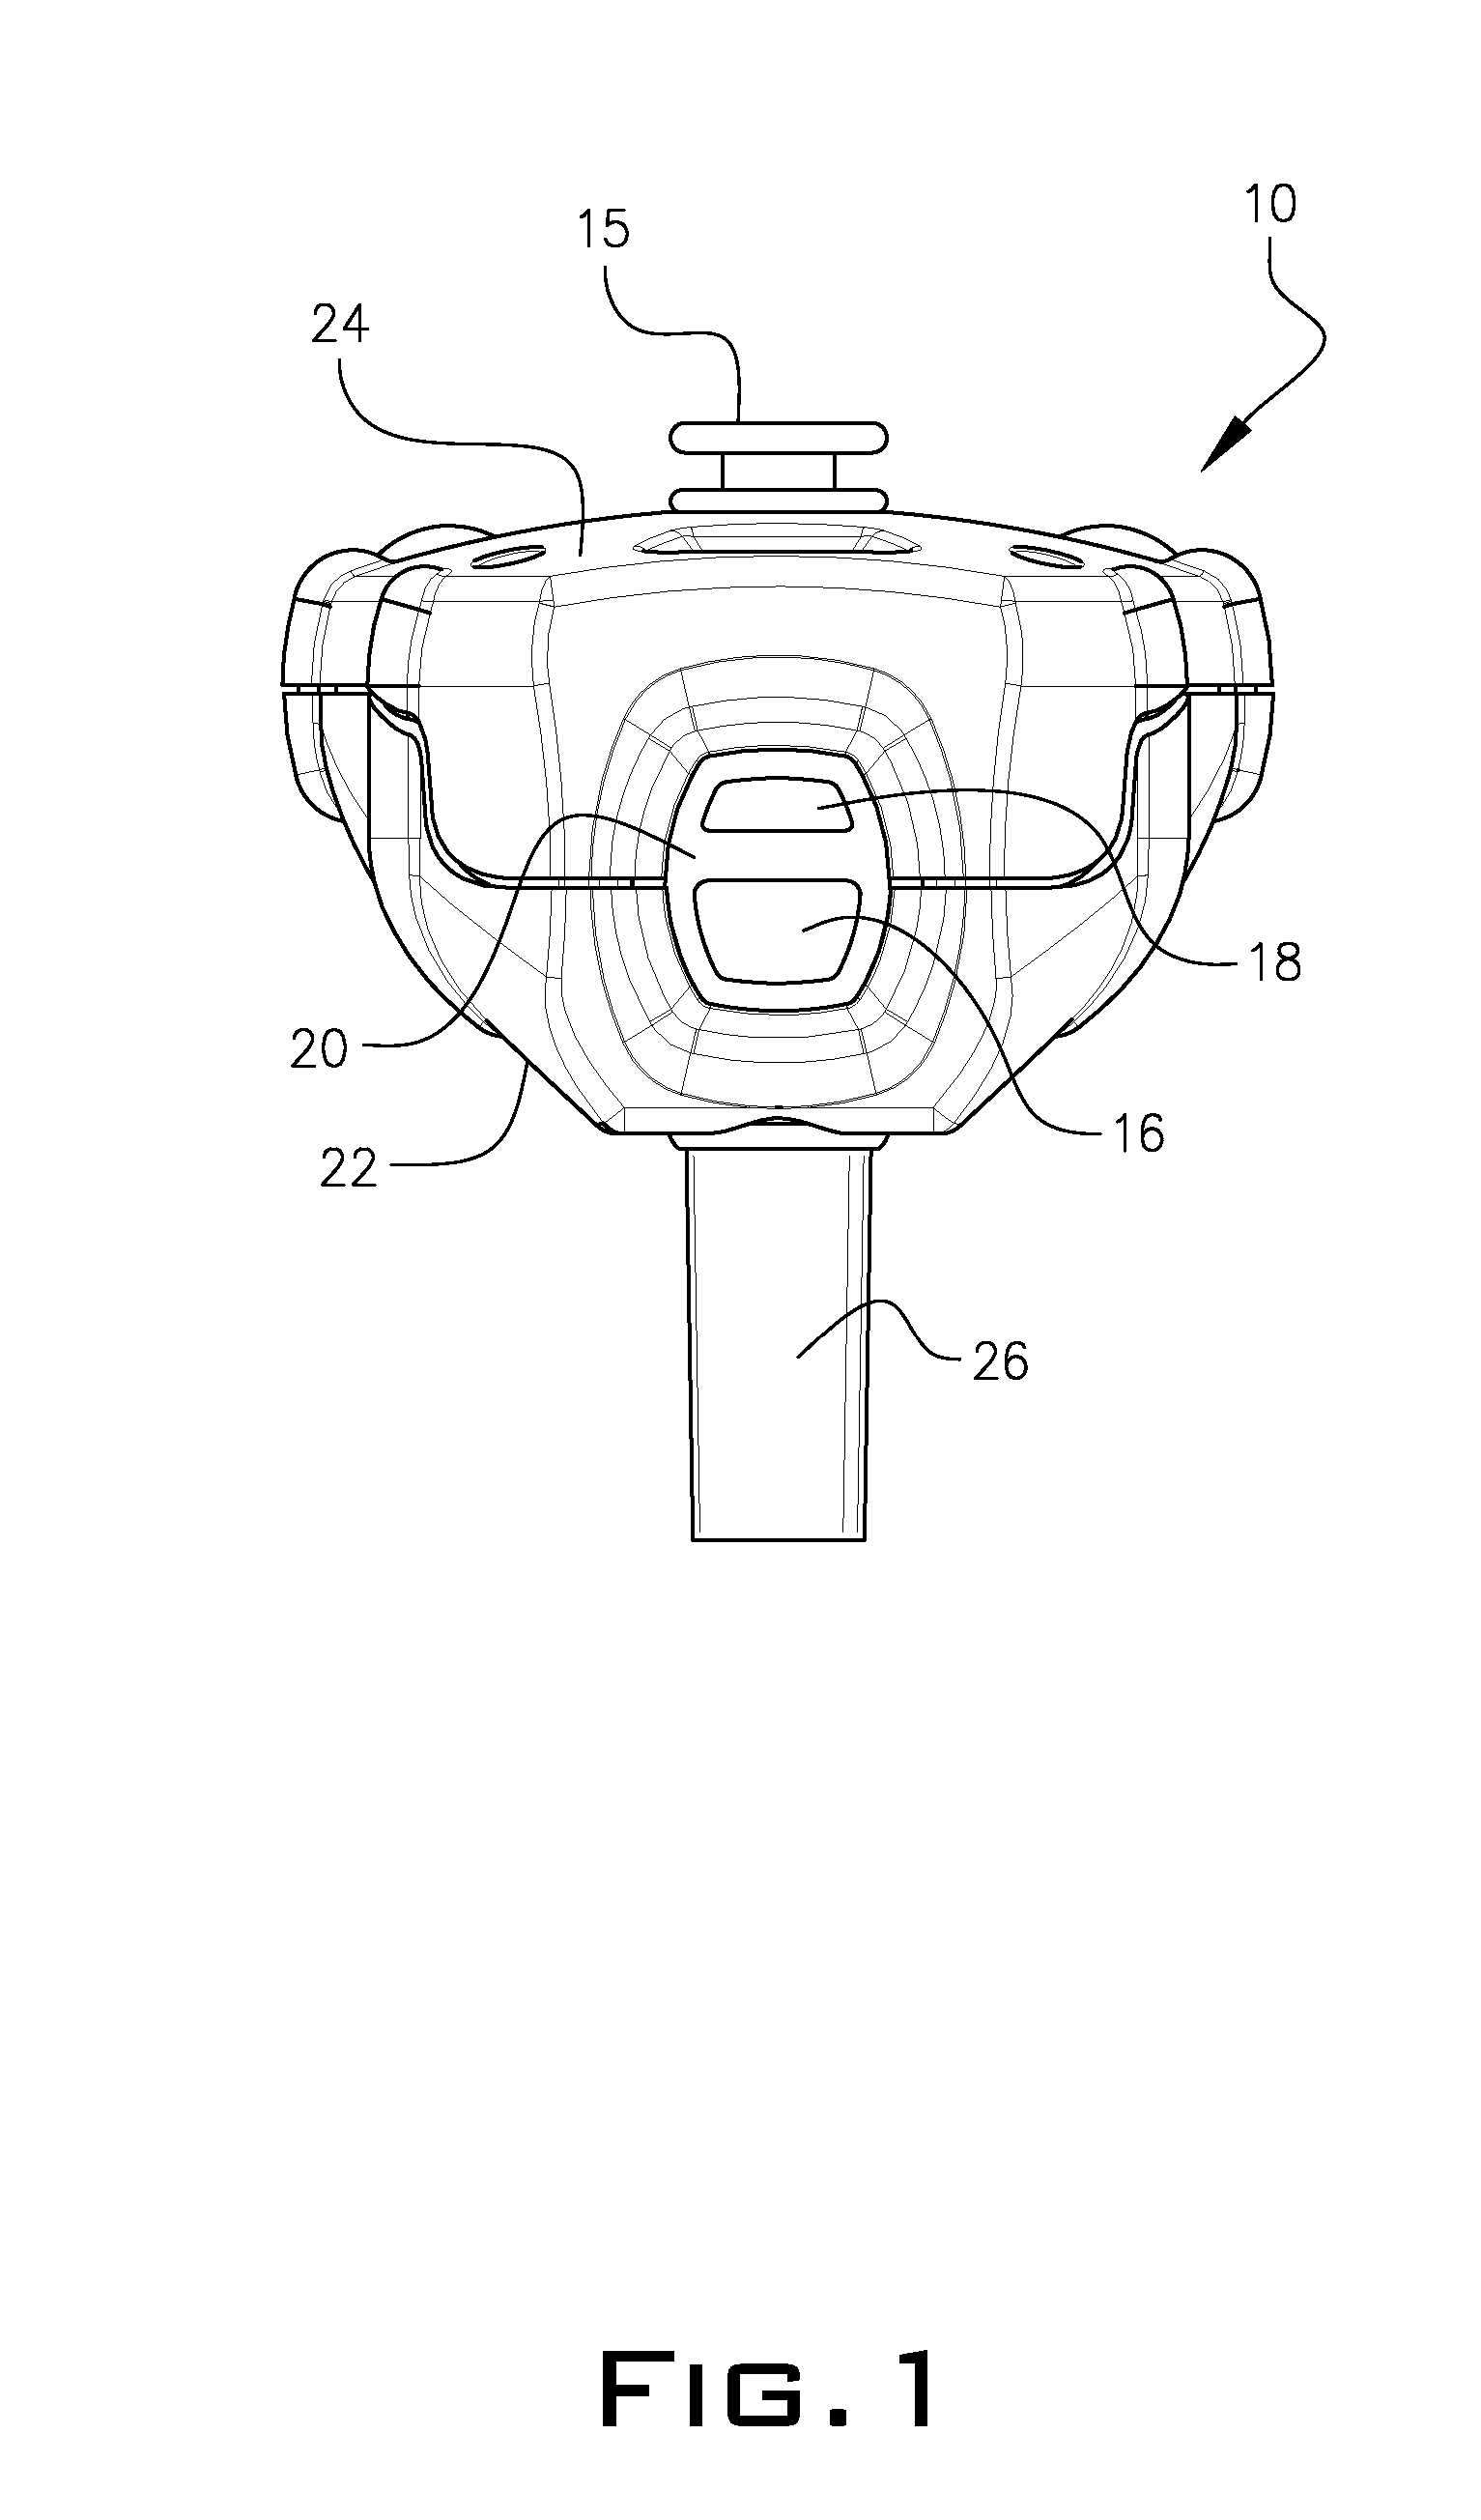 Vehicle sobriety interlock system with personal identification element